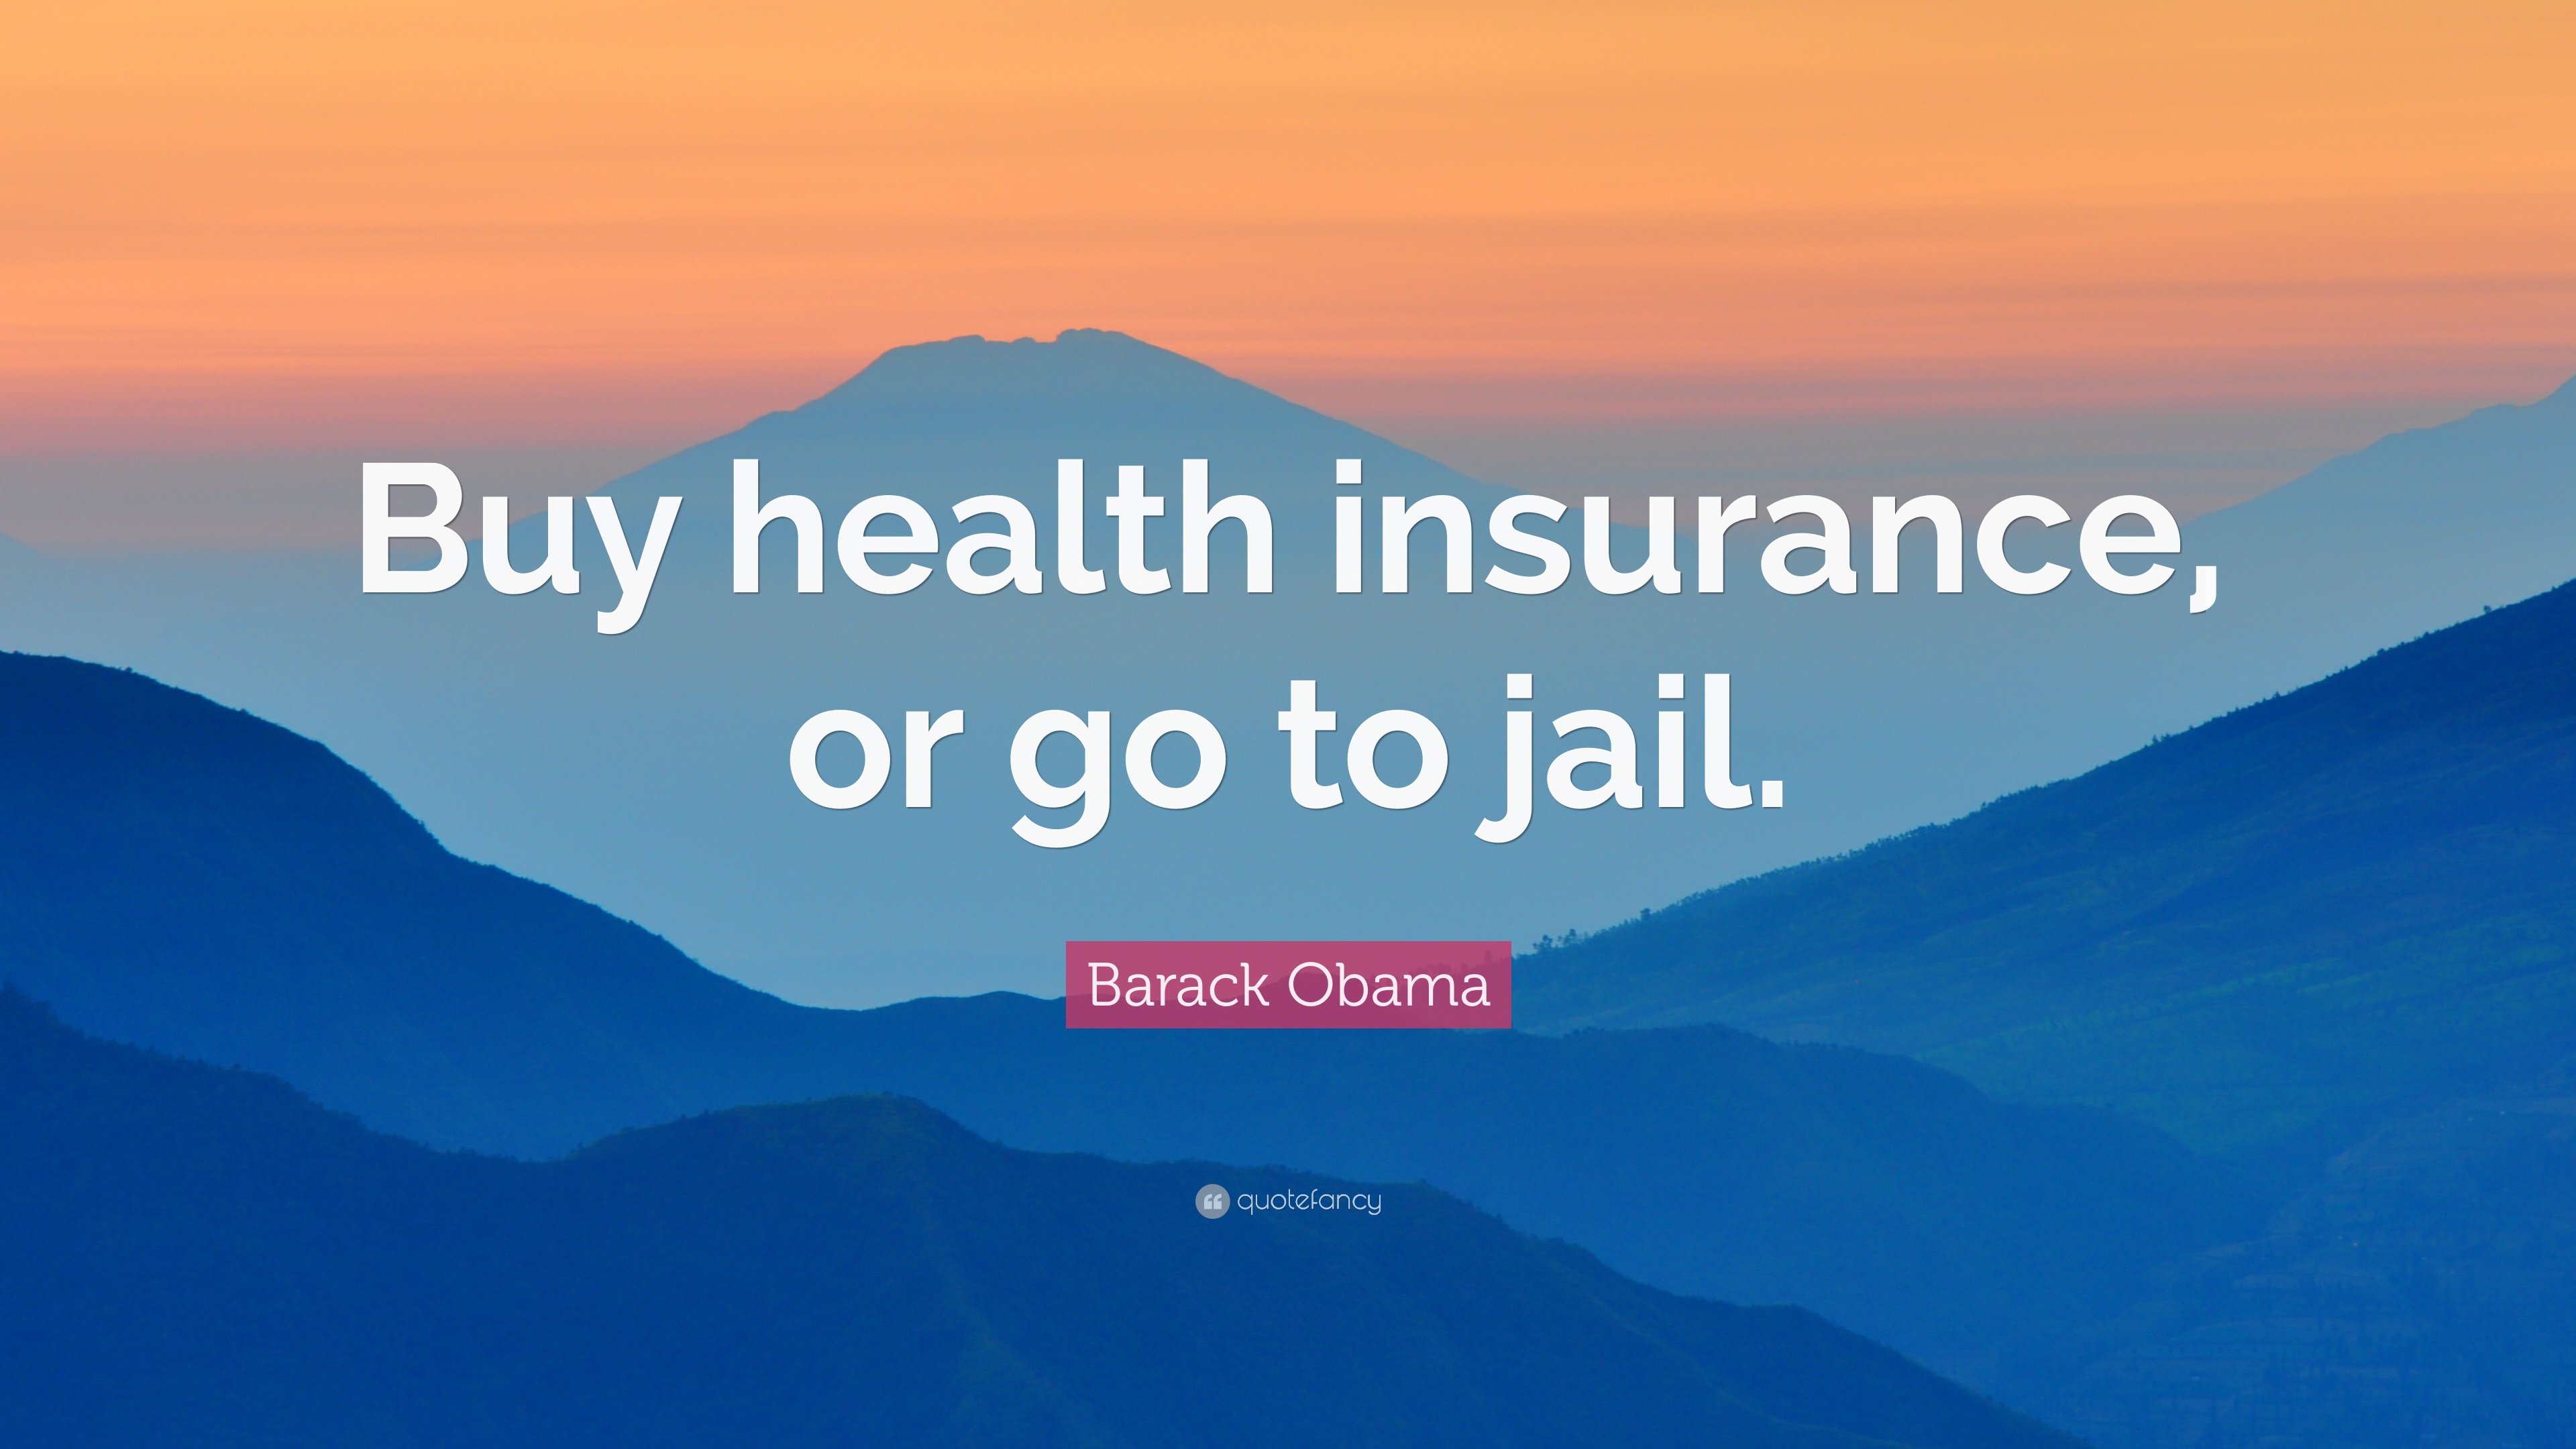 Barack Obama Quote: “Buy health insurance, or go to jail.” (7 ...